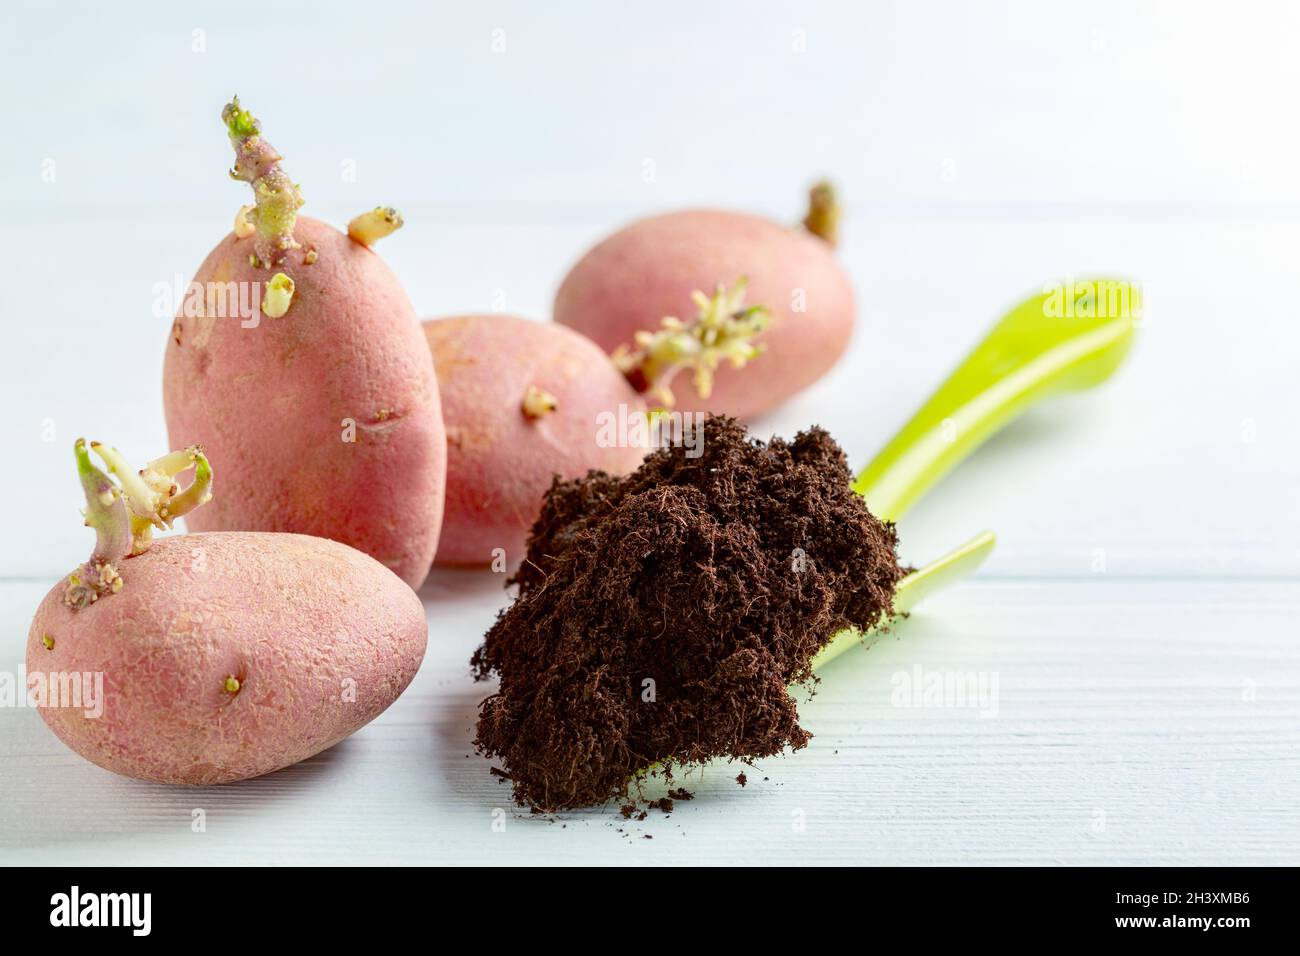 Sprouted potatoes and soil for planting. Stock Photo